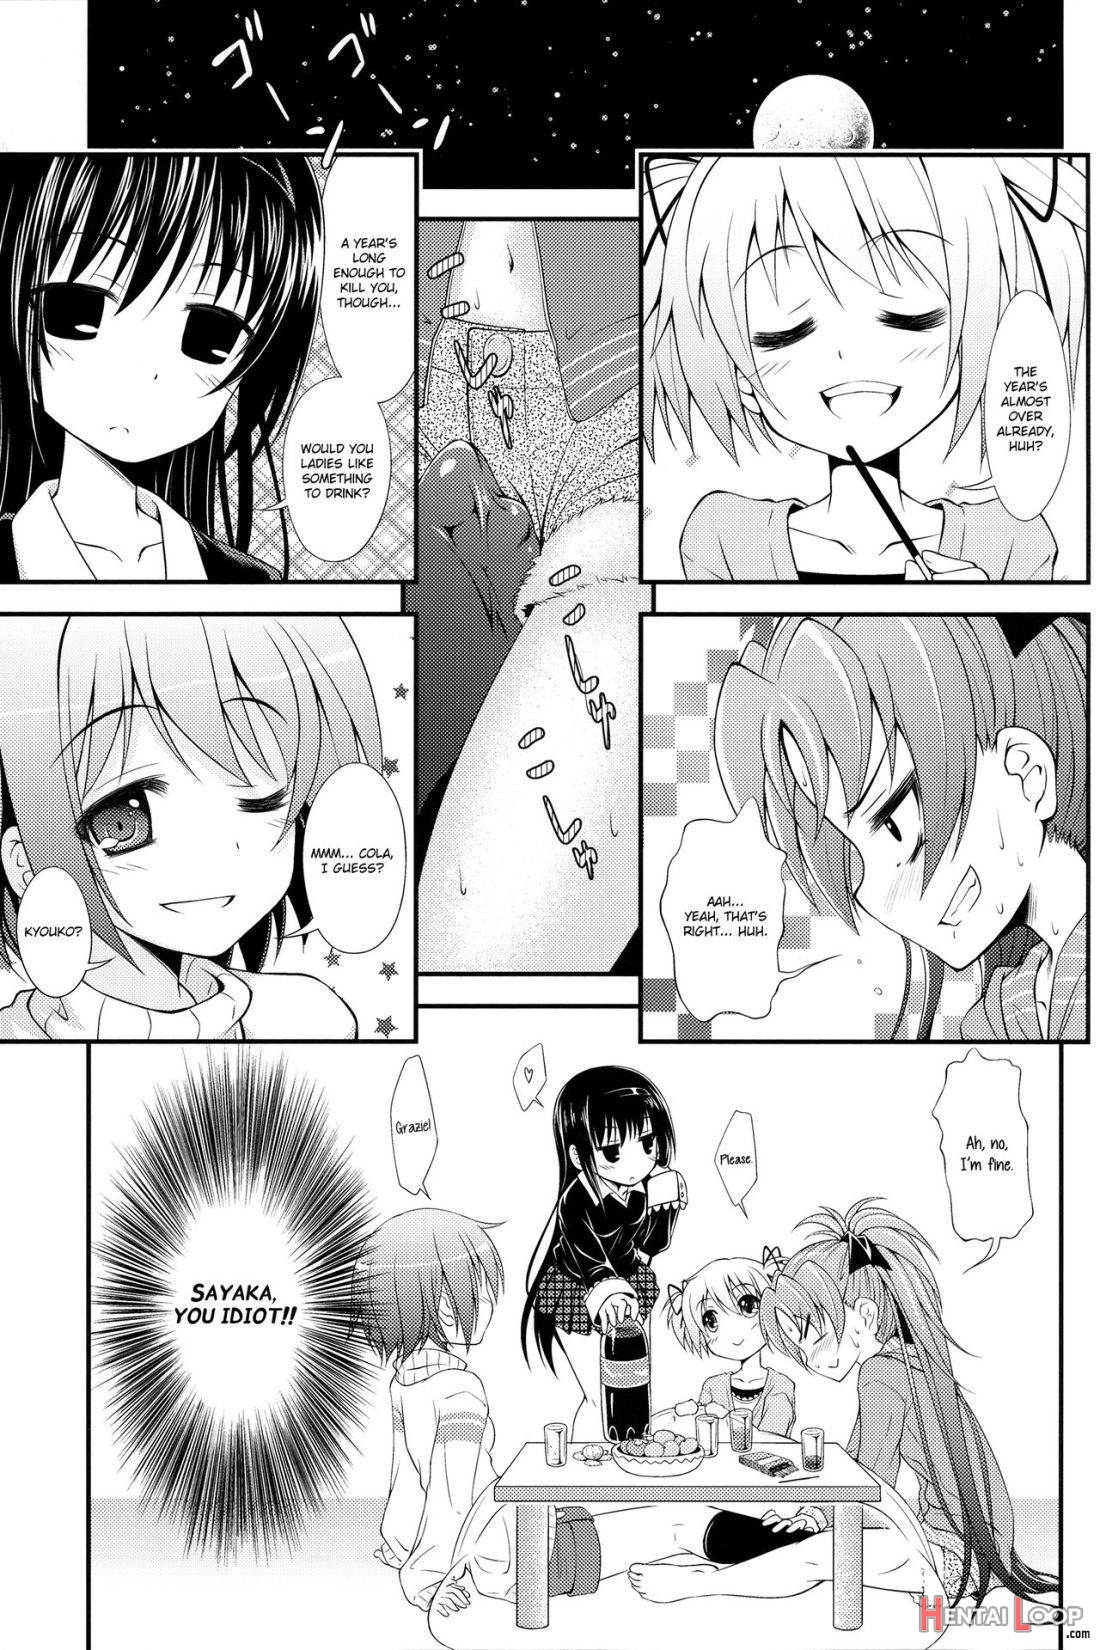 Lovely Girls’ Lily Vol.3 page 3